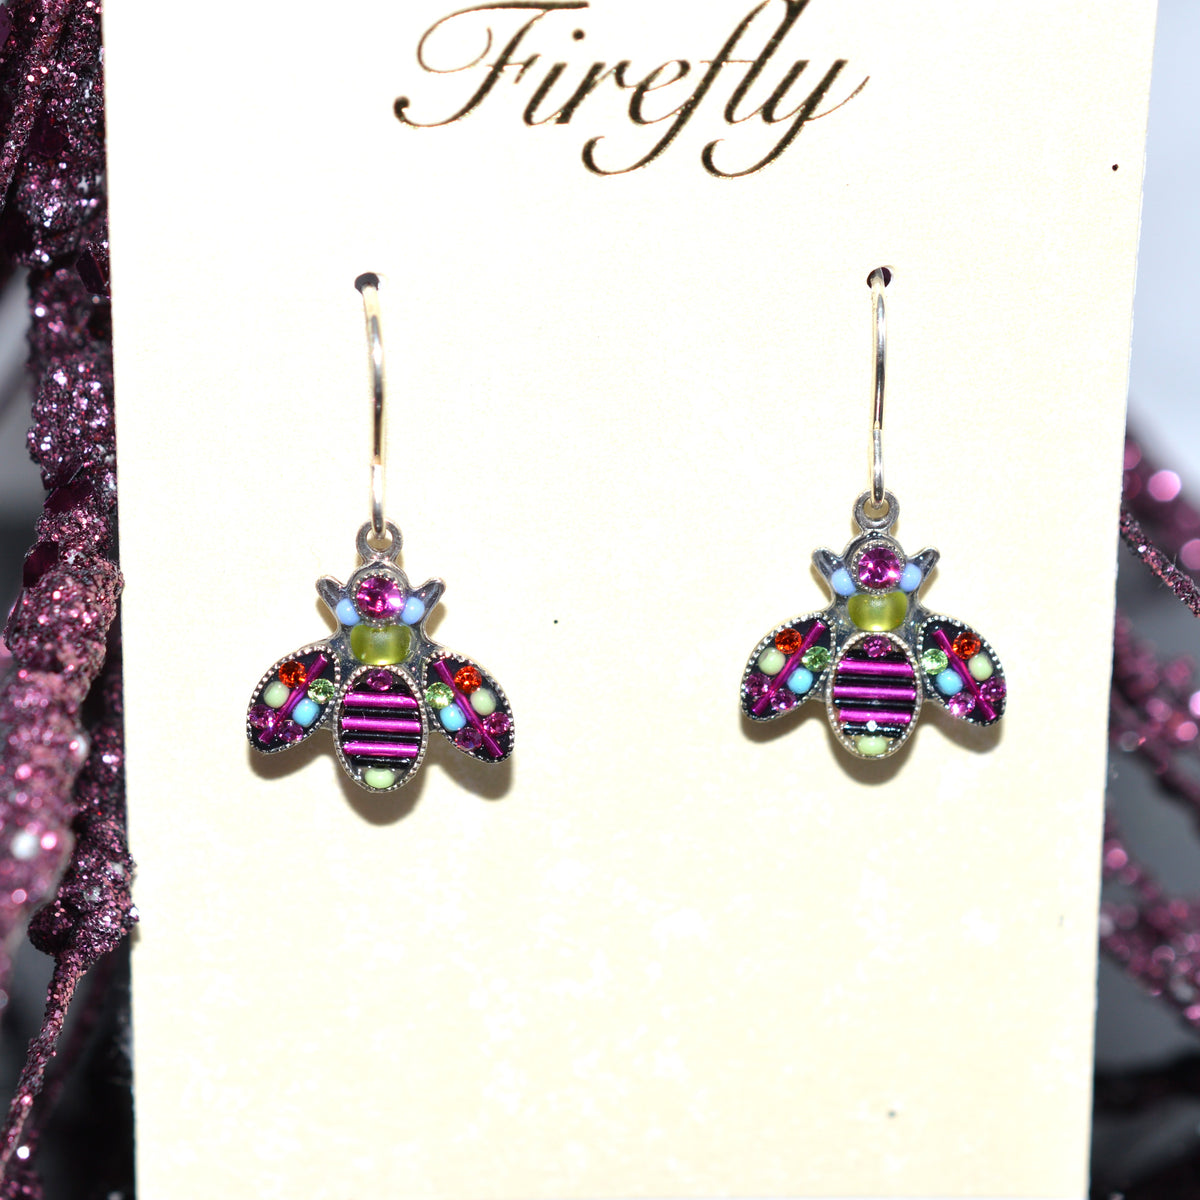 Antique Silver Plated Fuchsia Queen Bee Earrings by Firefly